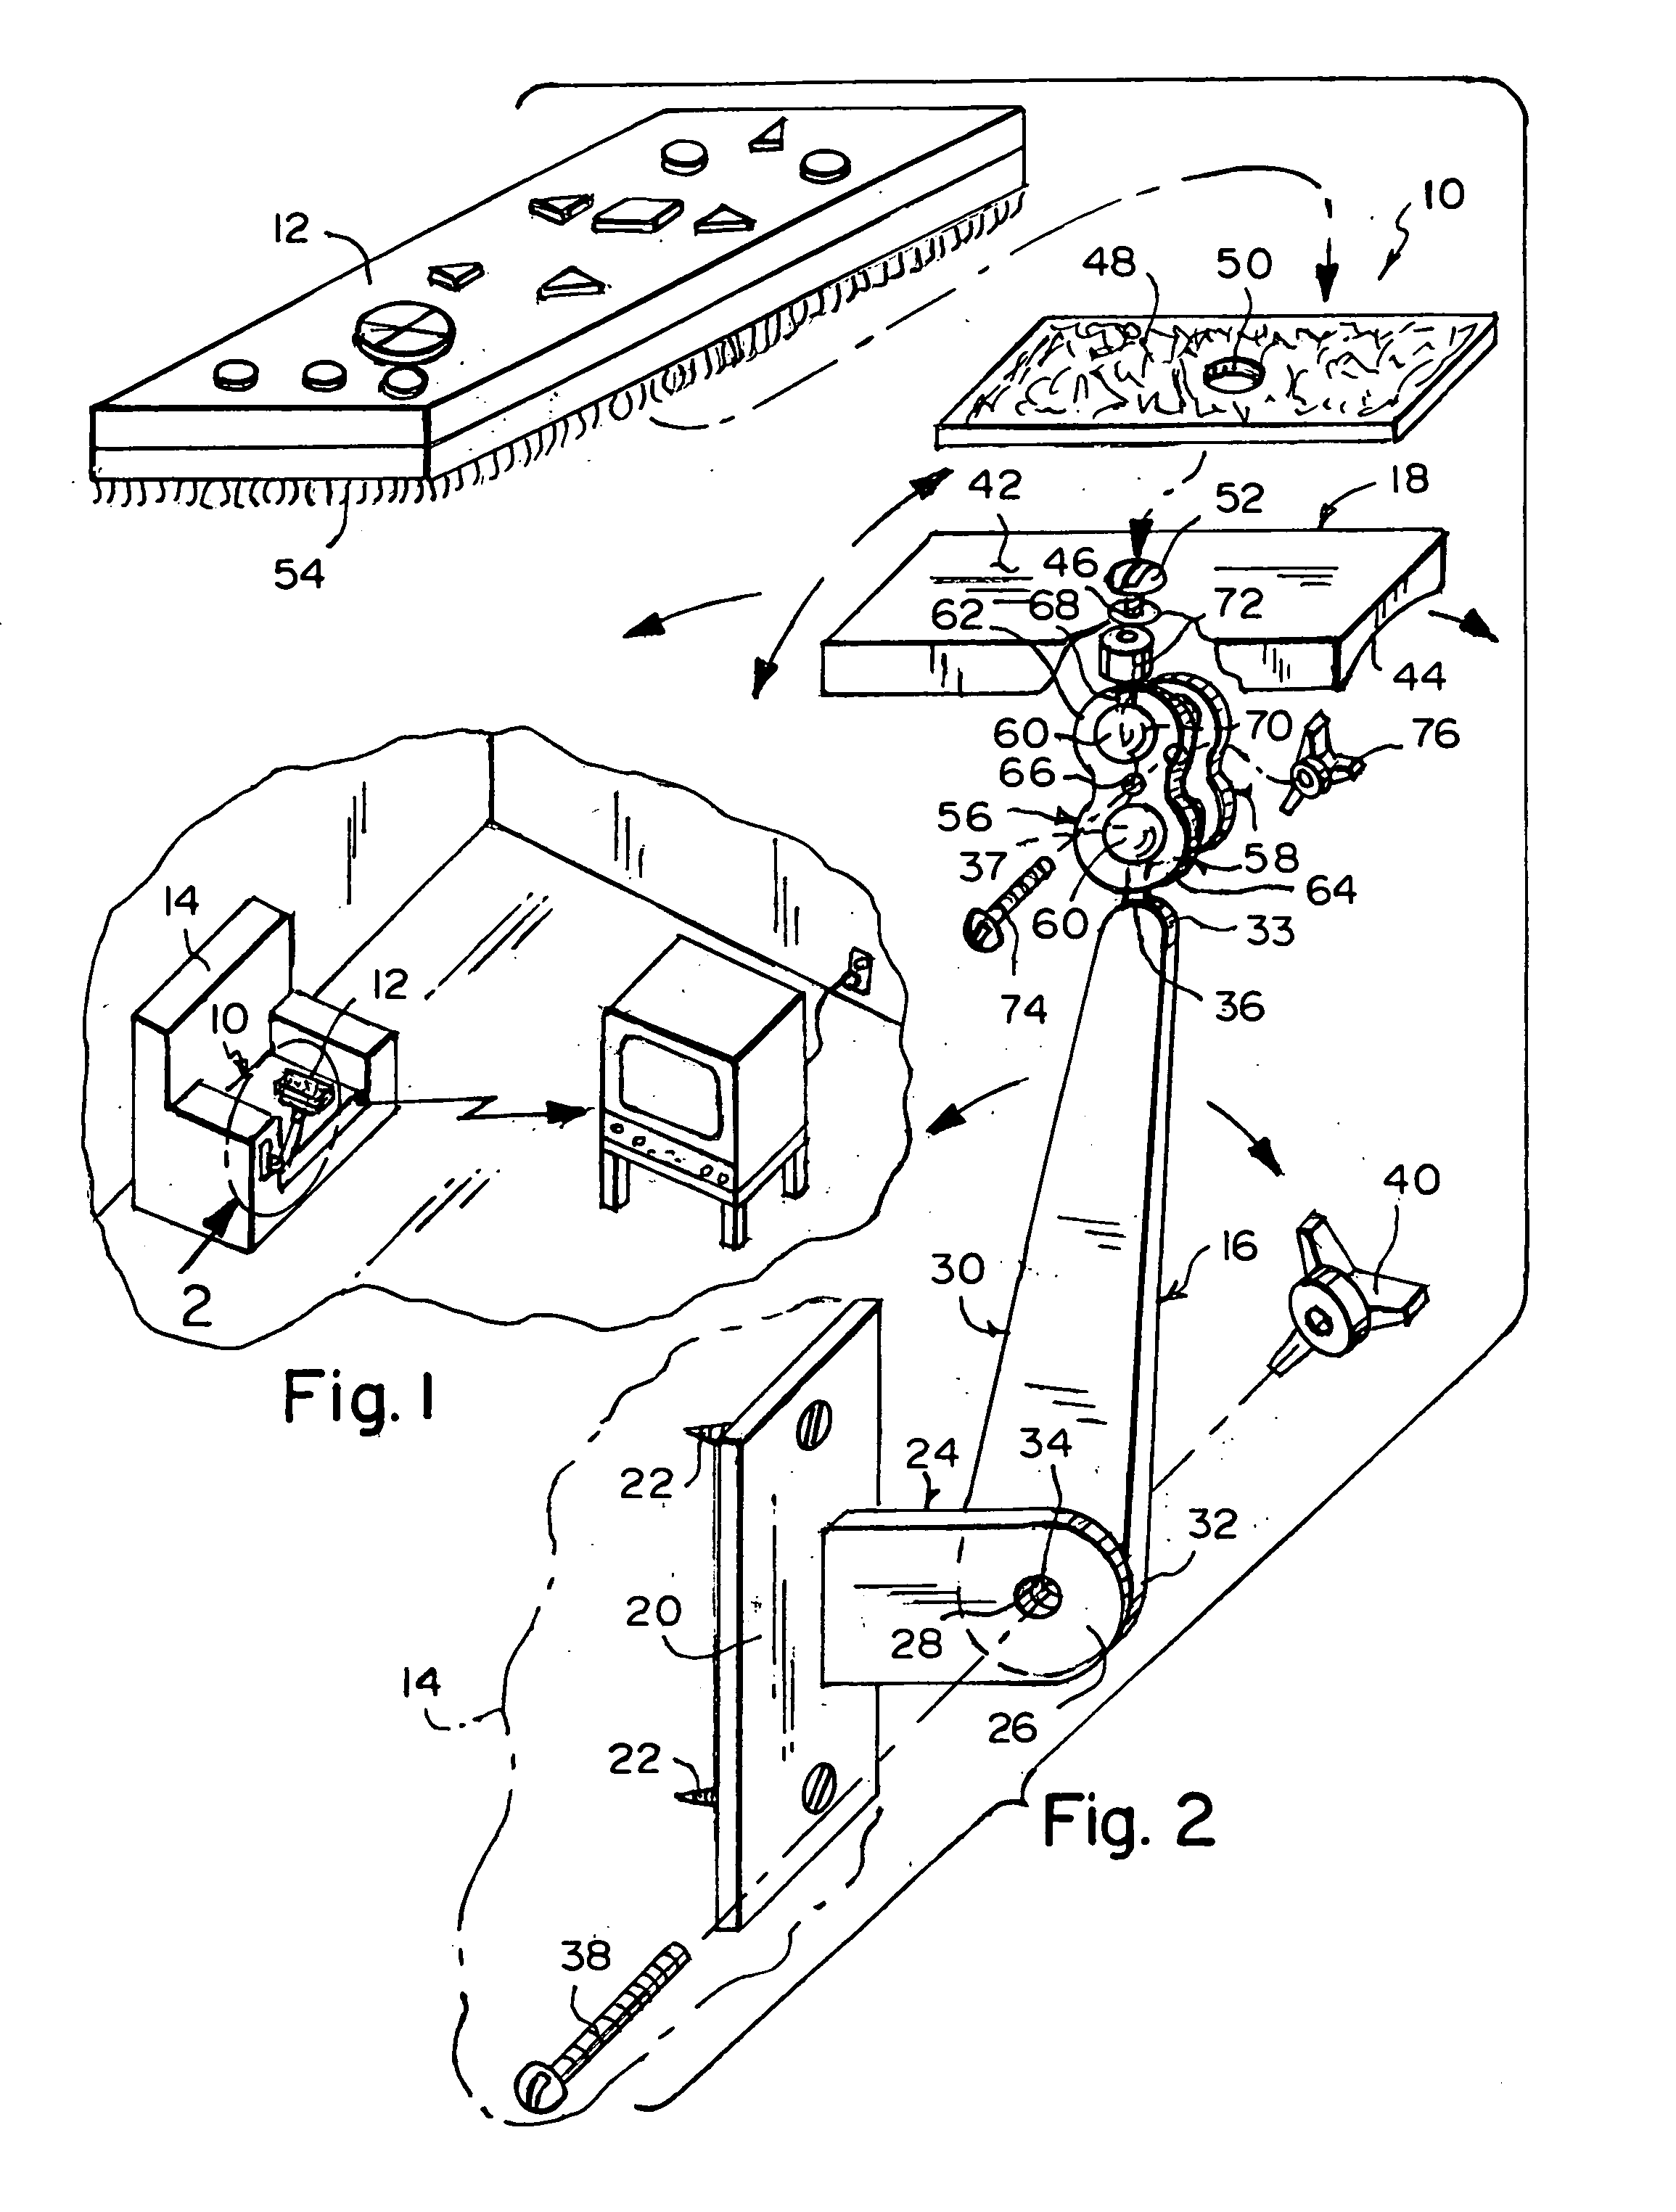 Holder for attaching a remote control to a piece of furniture